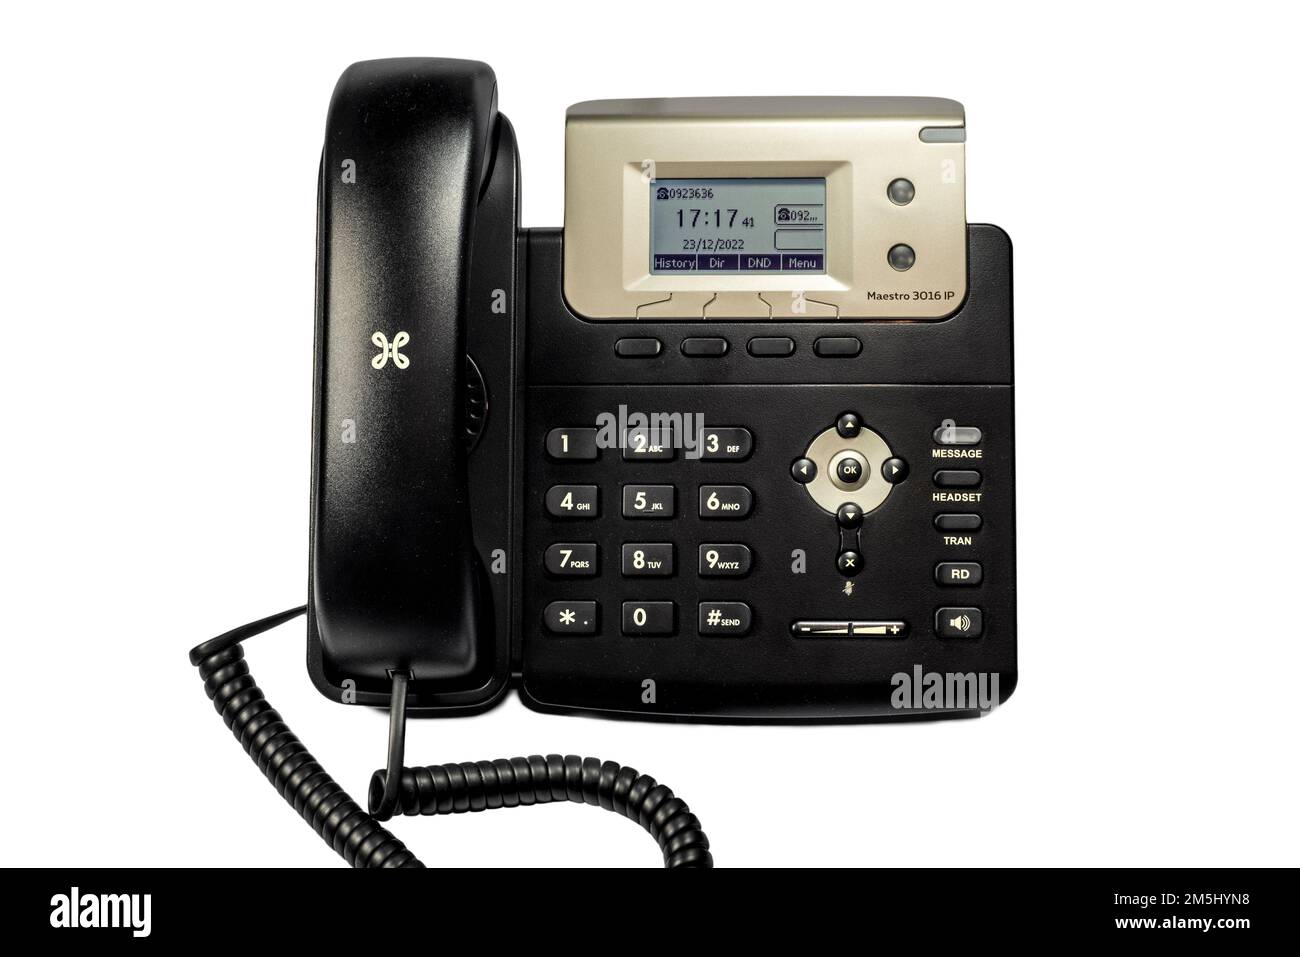 Maestro 3016 IP, black digital desktop telephone from Proximus Group, provider of digital services and communication in Belgium on white background Stock Photo